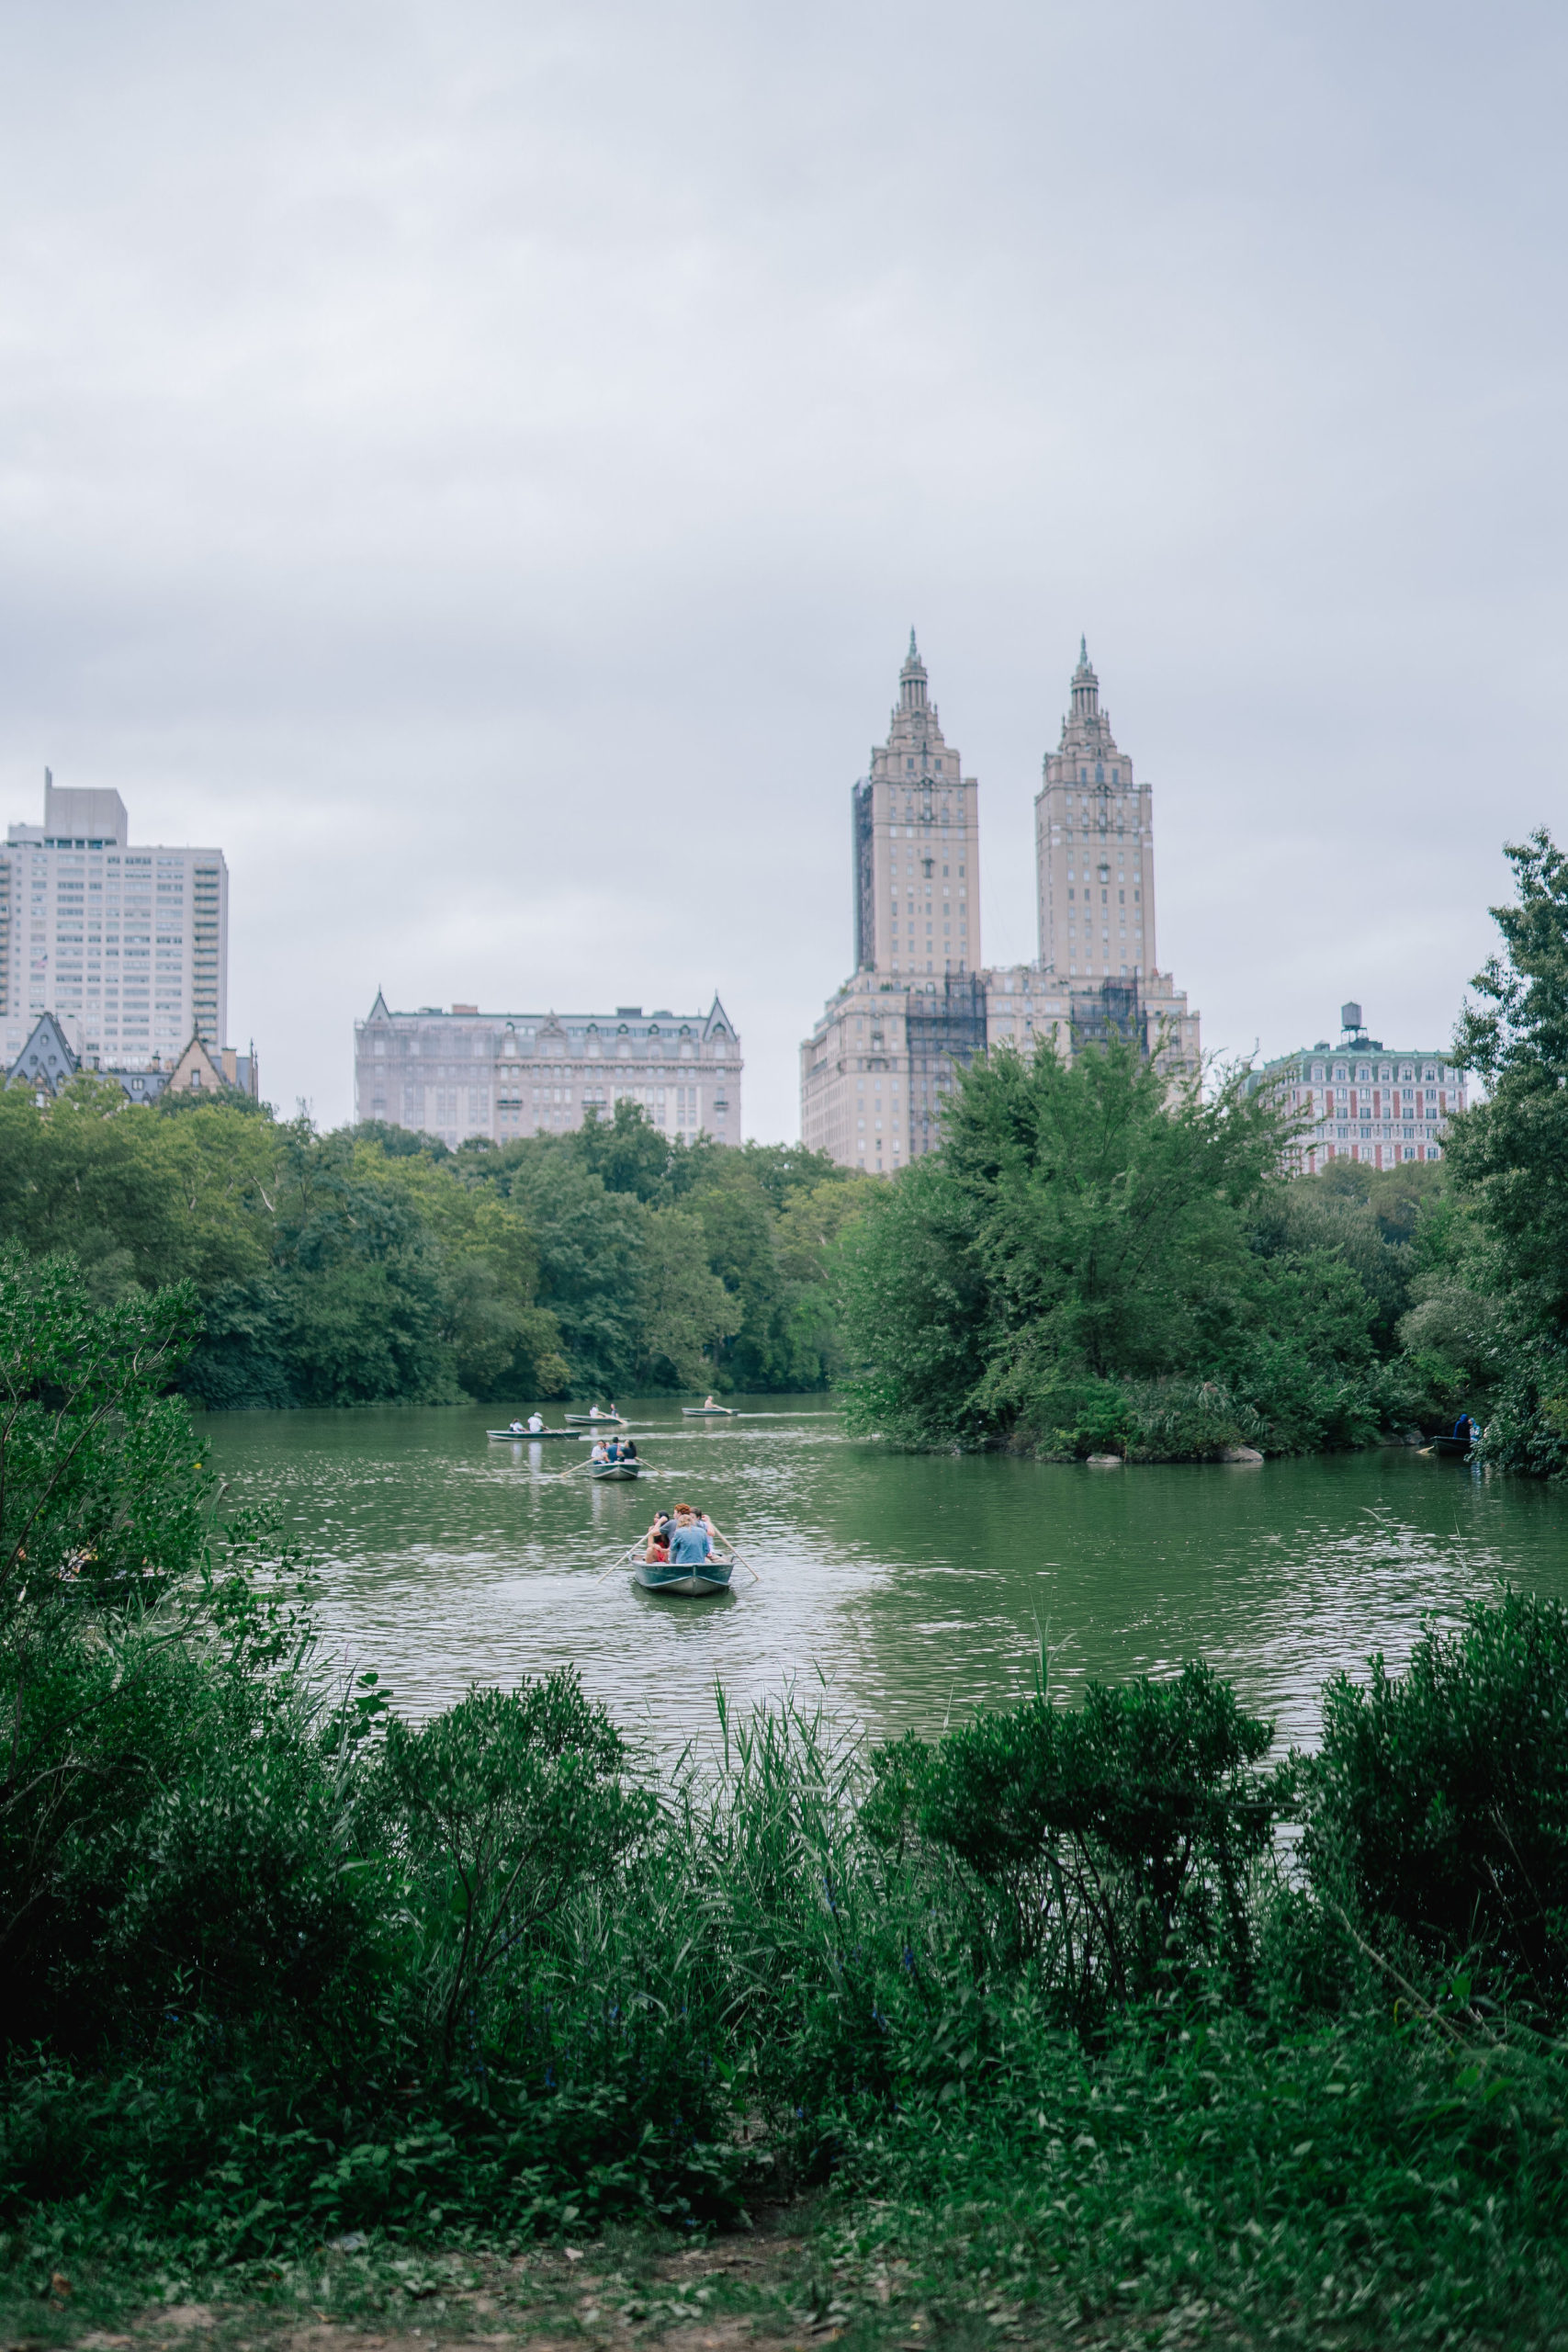 cityscape of NYC from Central Park near the Loeb Boathouse with a view of the pond and row boats